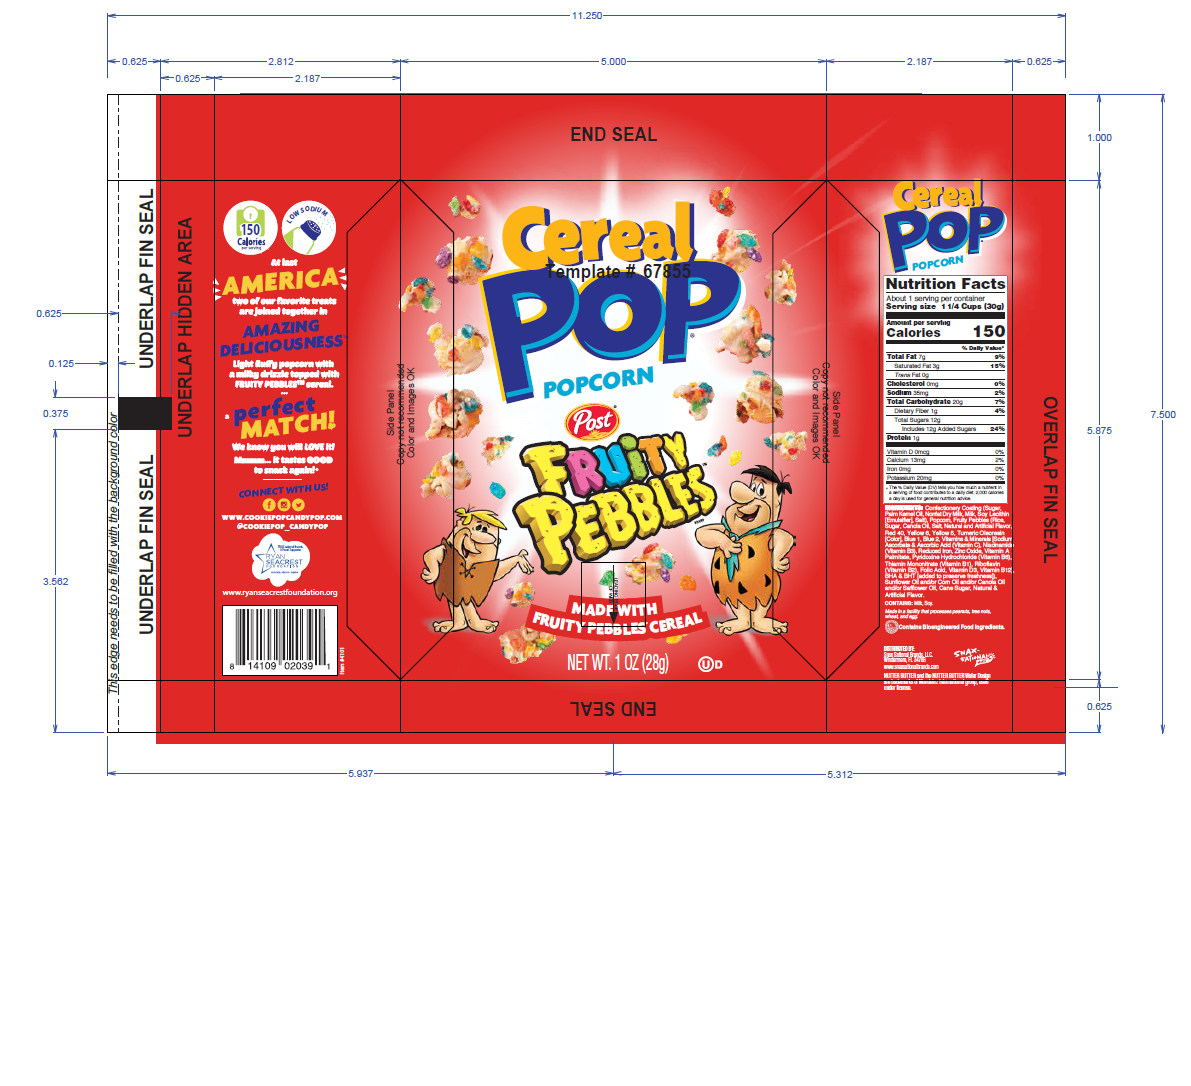 Cereal Pop Fruity Pebbles Popcorn 6 innerpacks per case 1.0 oz Product Label